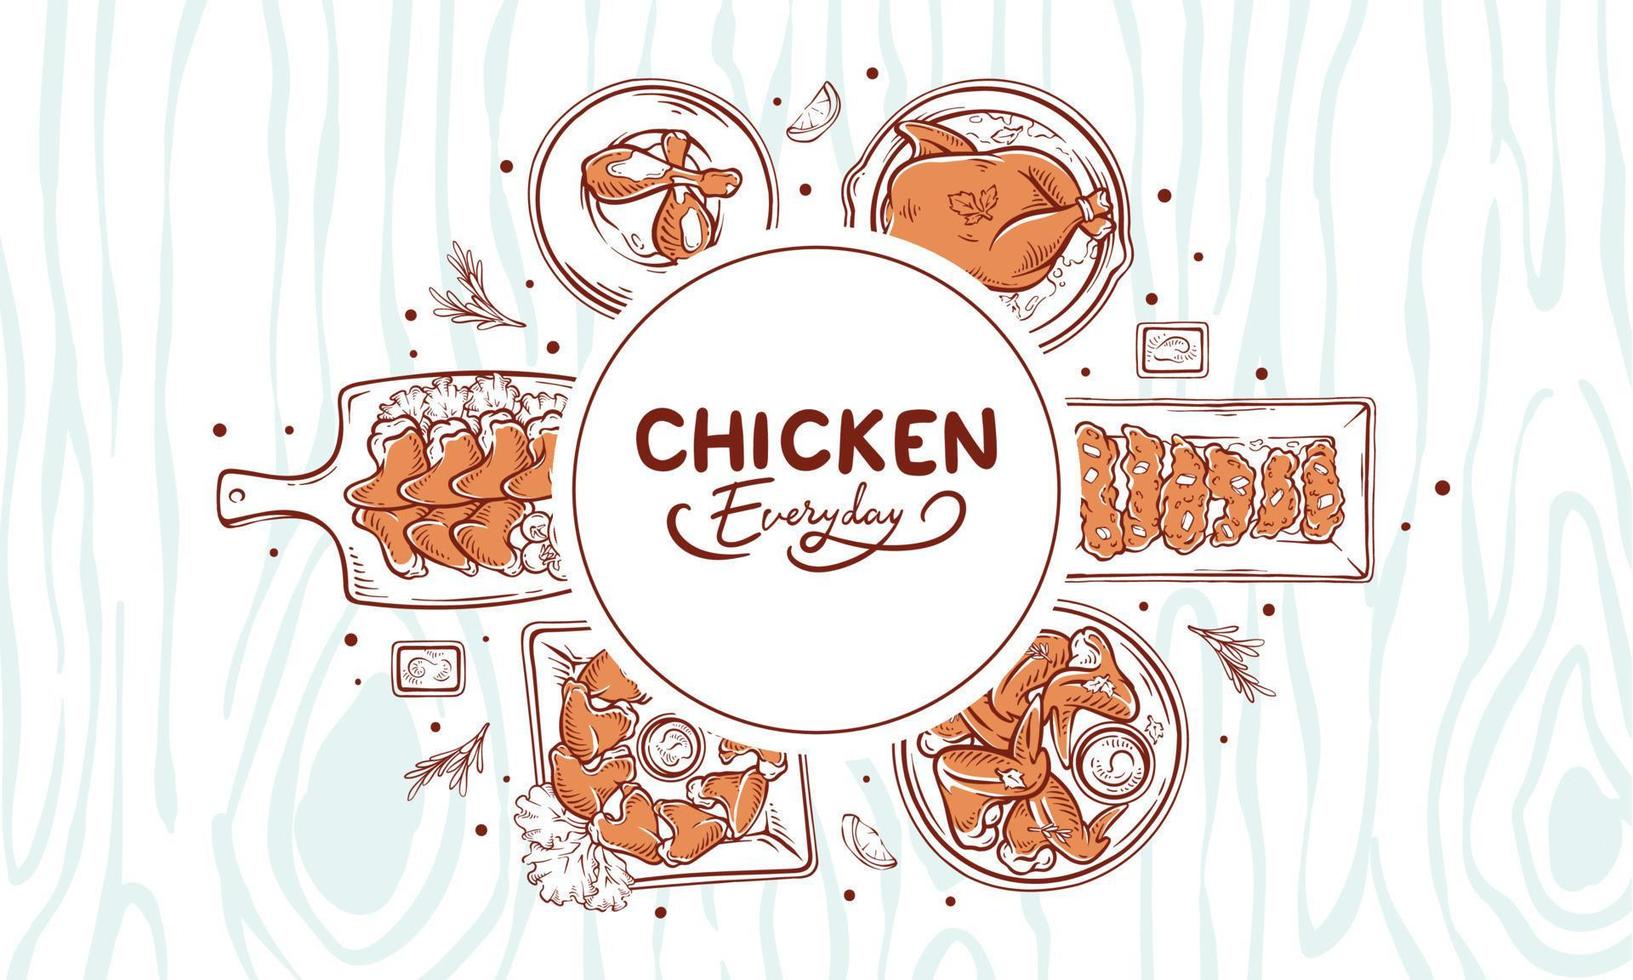 Hand drawn Chicken Dish set illustration top view. Chicken meal collection with wooden pattern background. Chicken simple drawing vector design drawing